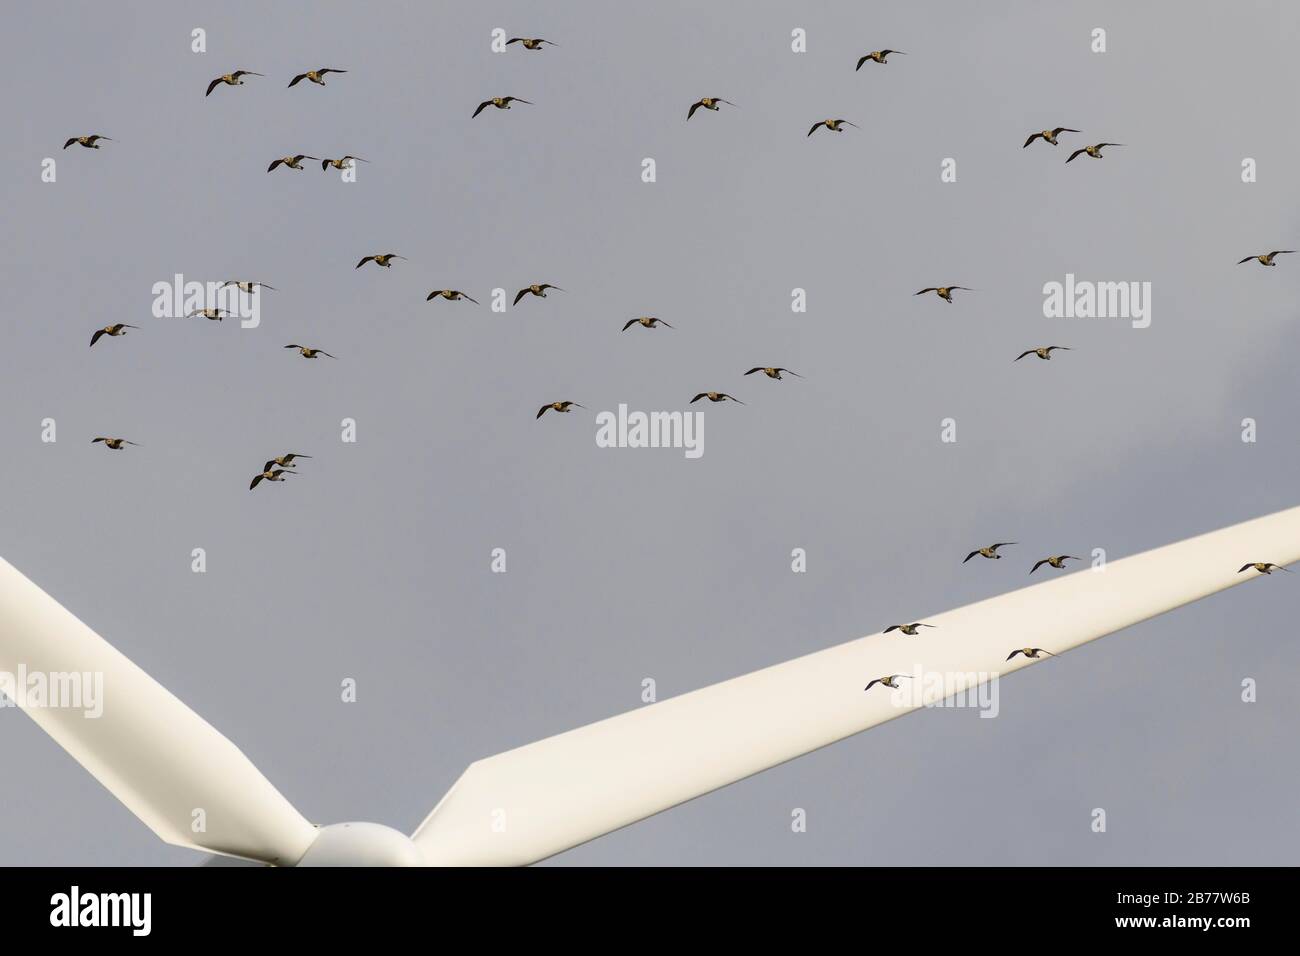 European golden plover (Pluvialis apricaria), flock of birds in flight above the wings of a wind turbine, Bredstedt, Schleswig-Holstein, Germany Stock Photo